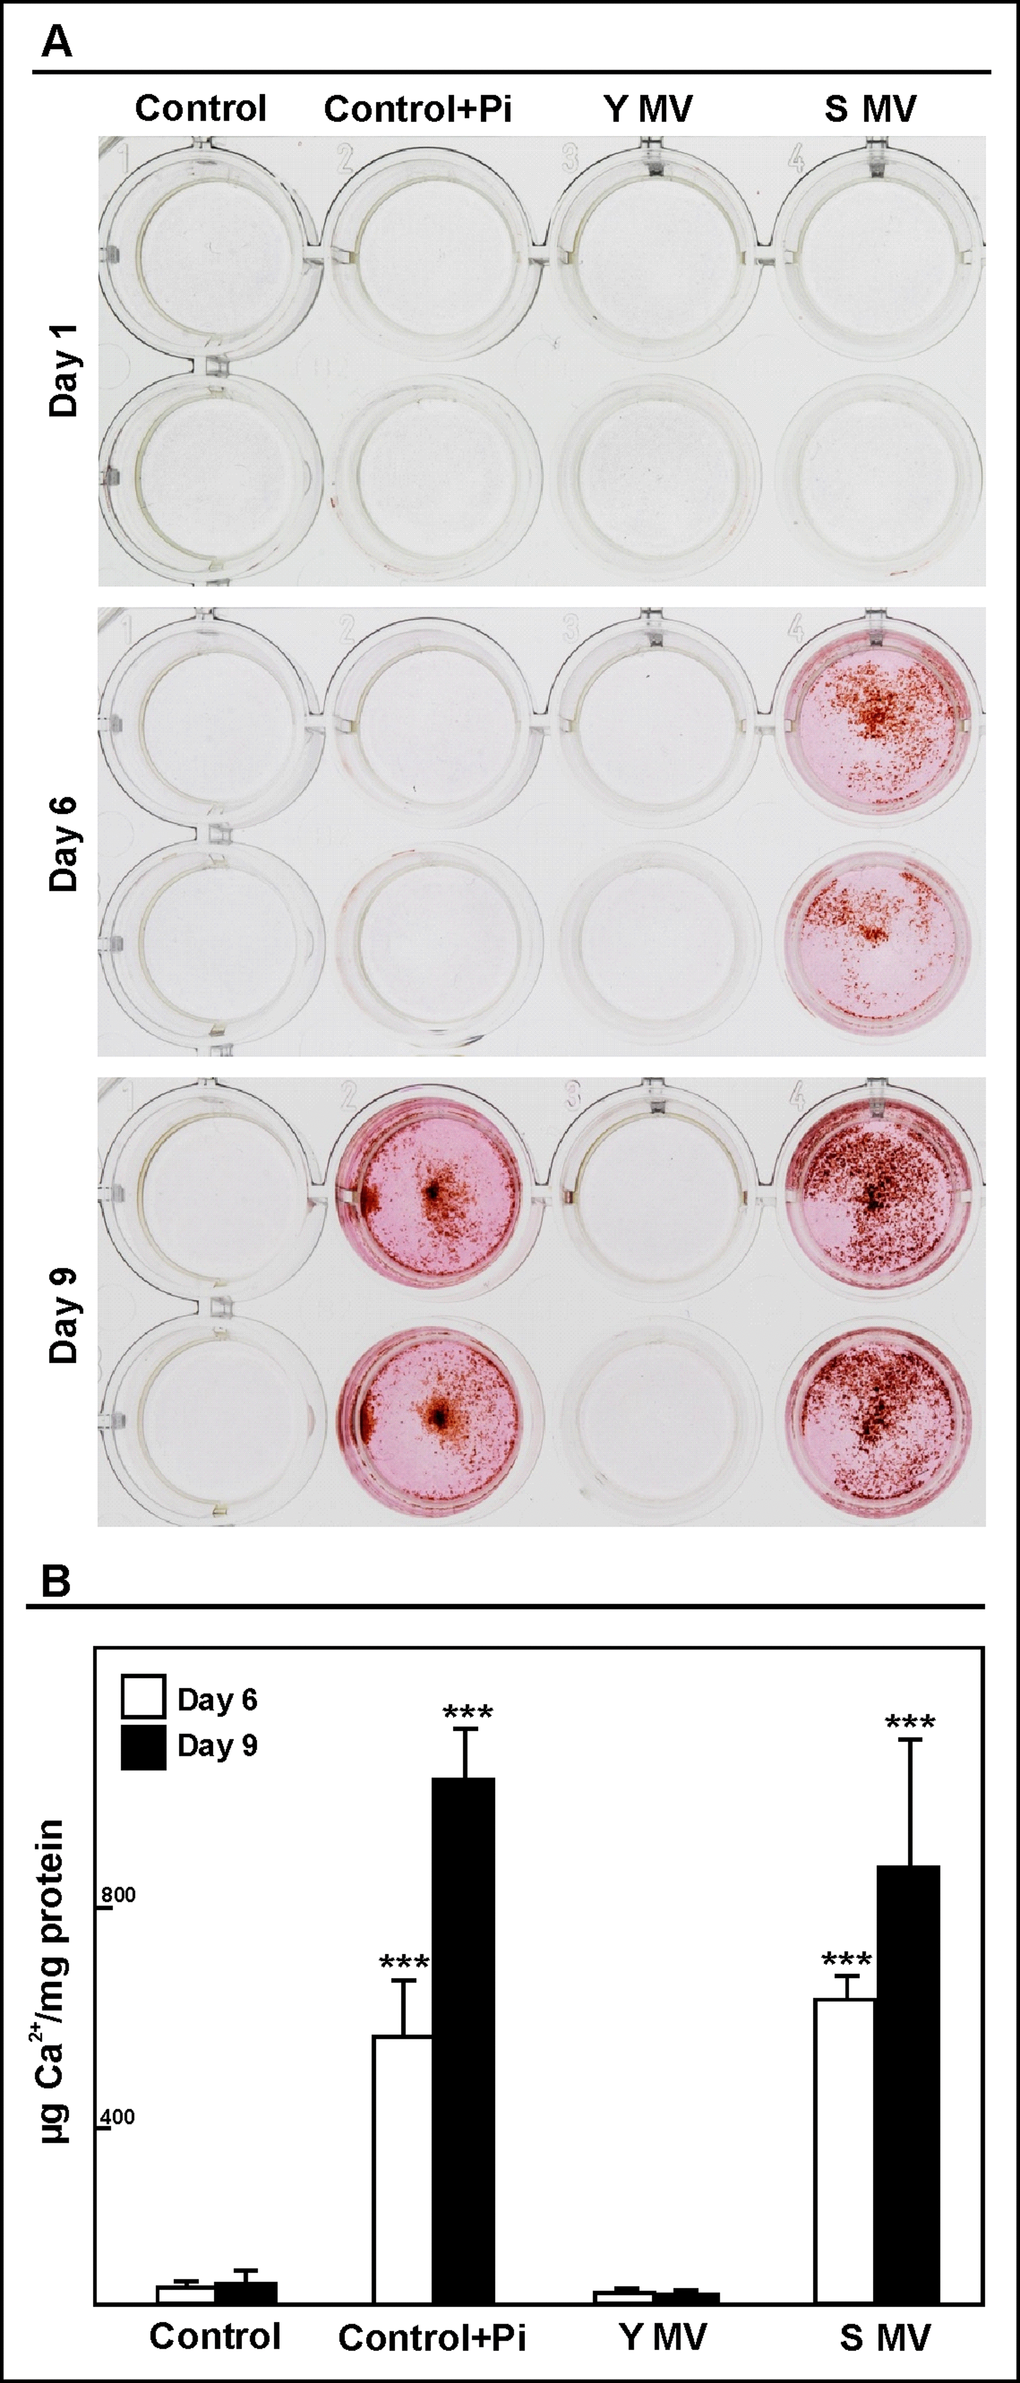 MVs from senescent HUVEC cells induced calcification in HASMC. Cells were cultured with 50,000 MVs/mL from young (Y MV) or senescent (S MV) HUVEC for different times. (A) Qualitative calcification was stained with alizarin red. A representative experiment from six different experiments per duplicate is show. (B) Calcium content was determined by spectrophotometer by phenolsulphonephthalein dye at 6 and 9 days of treatment. The graphs present calcium content of the cells expressed as µg/mg protein. The data represent means ± SD of 3 independent experiments. *** p